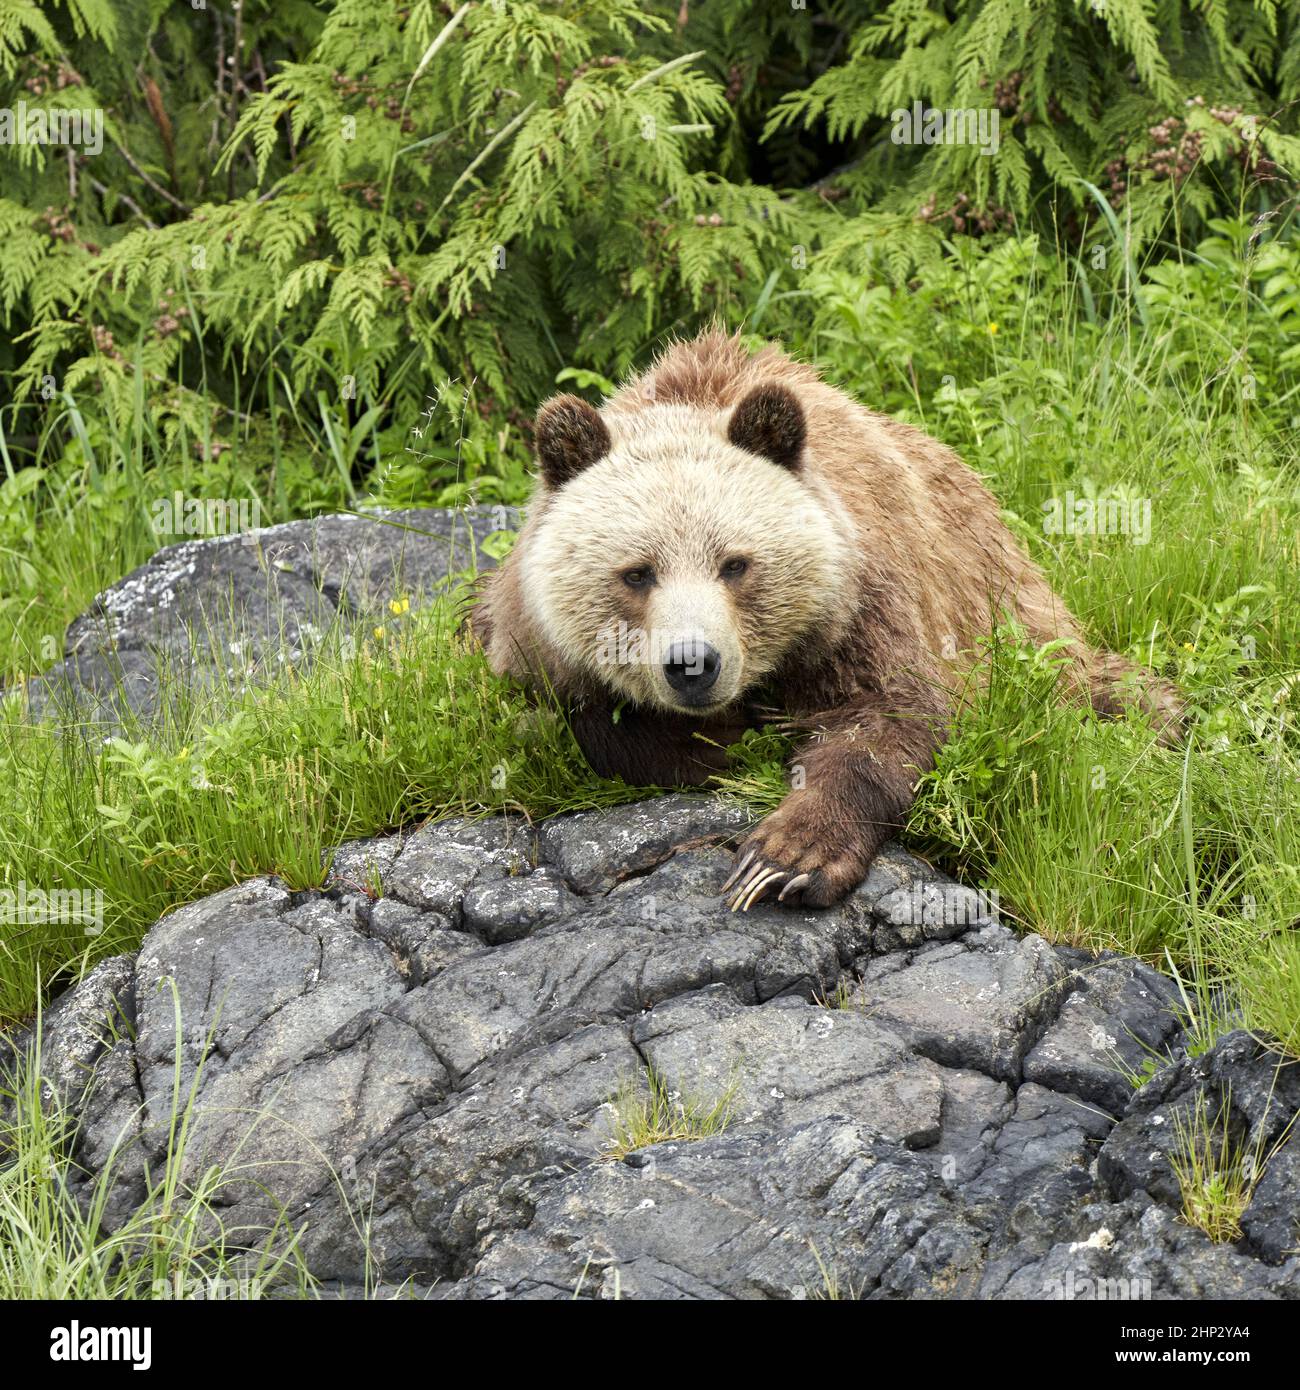 Brown baby grizzly cub resting on a grey rock in the green grass showing its long claws. Stock Photo